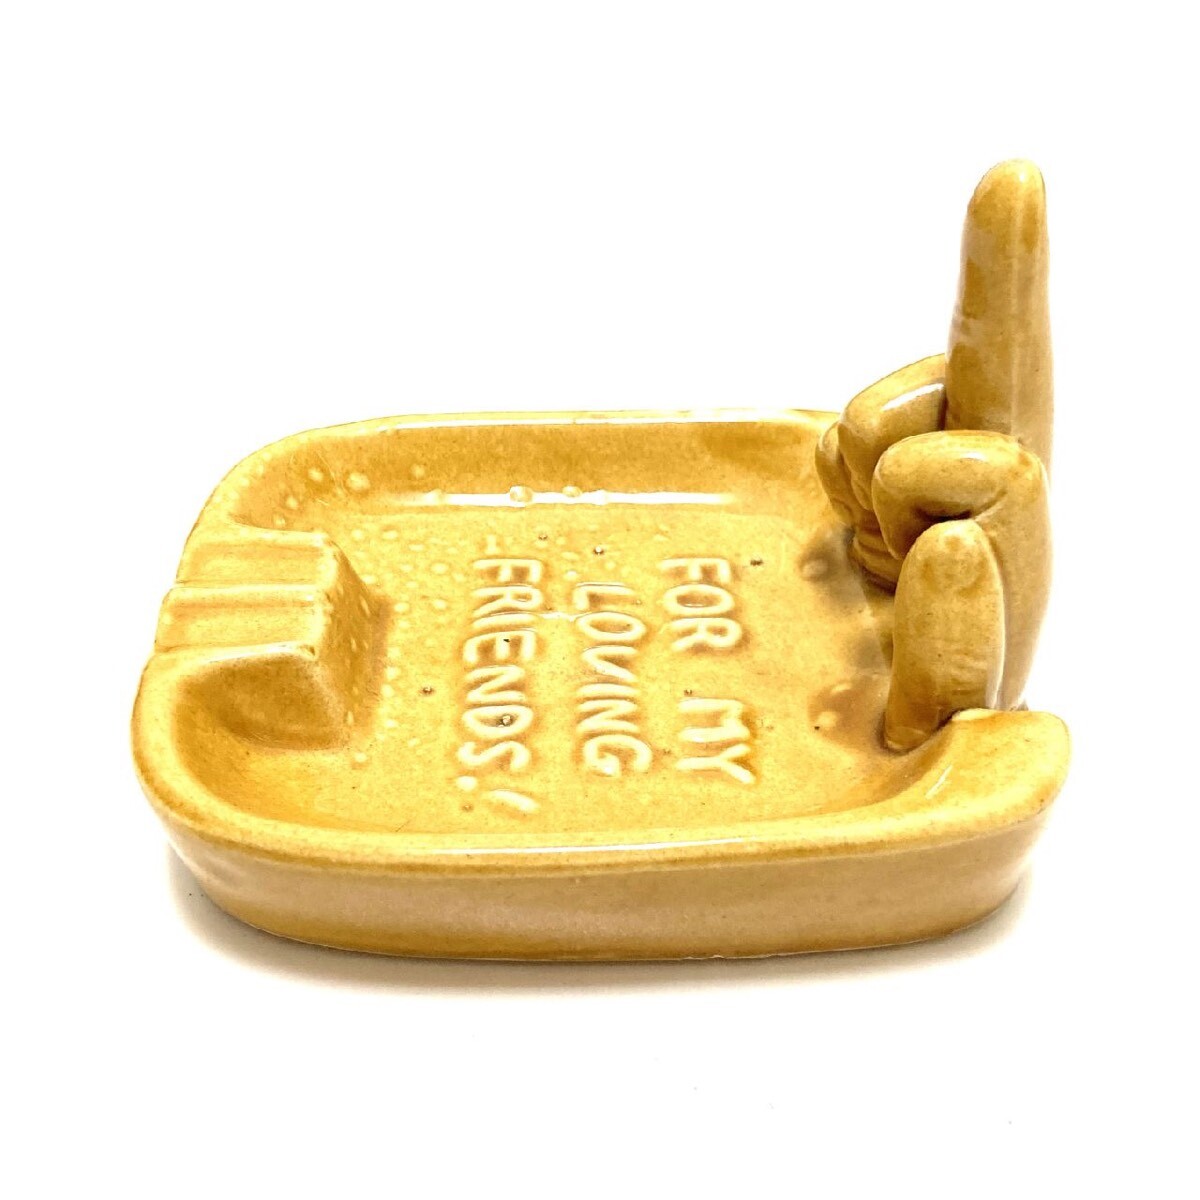 60's ASHTRAY with JOKE MESSAGE & FINGER - NOW OR NEVER